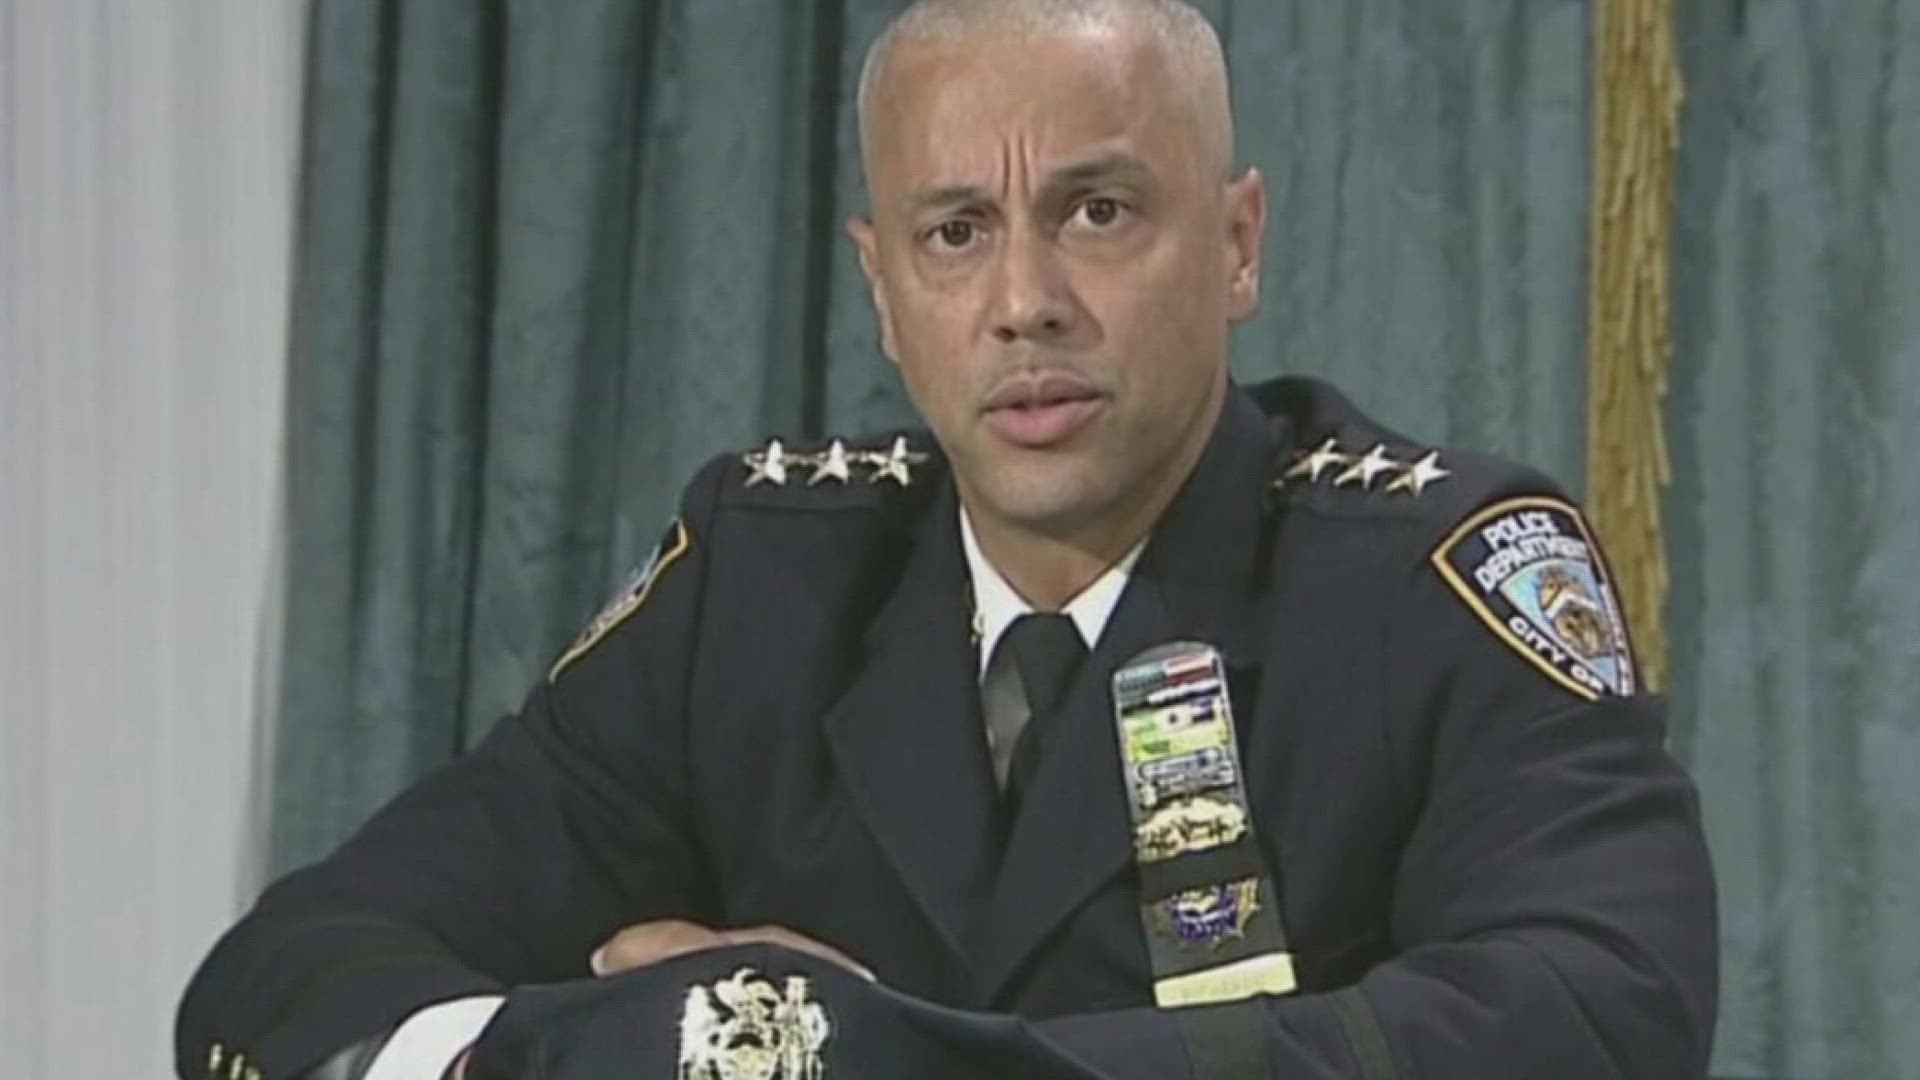 An email from NOPD Superintendent Shaun Ferguson said that Fausto Pichardo would act as a “consulting Chief of Operations.”